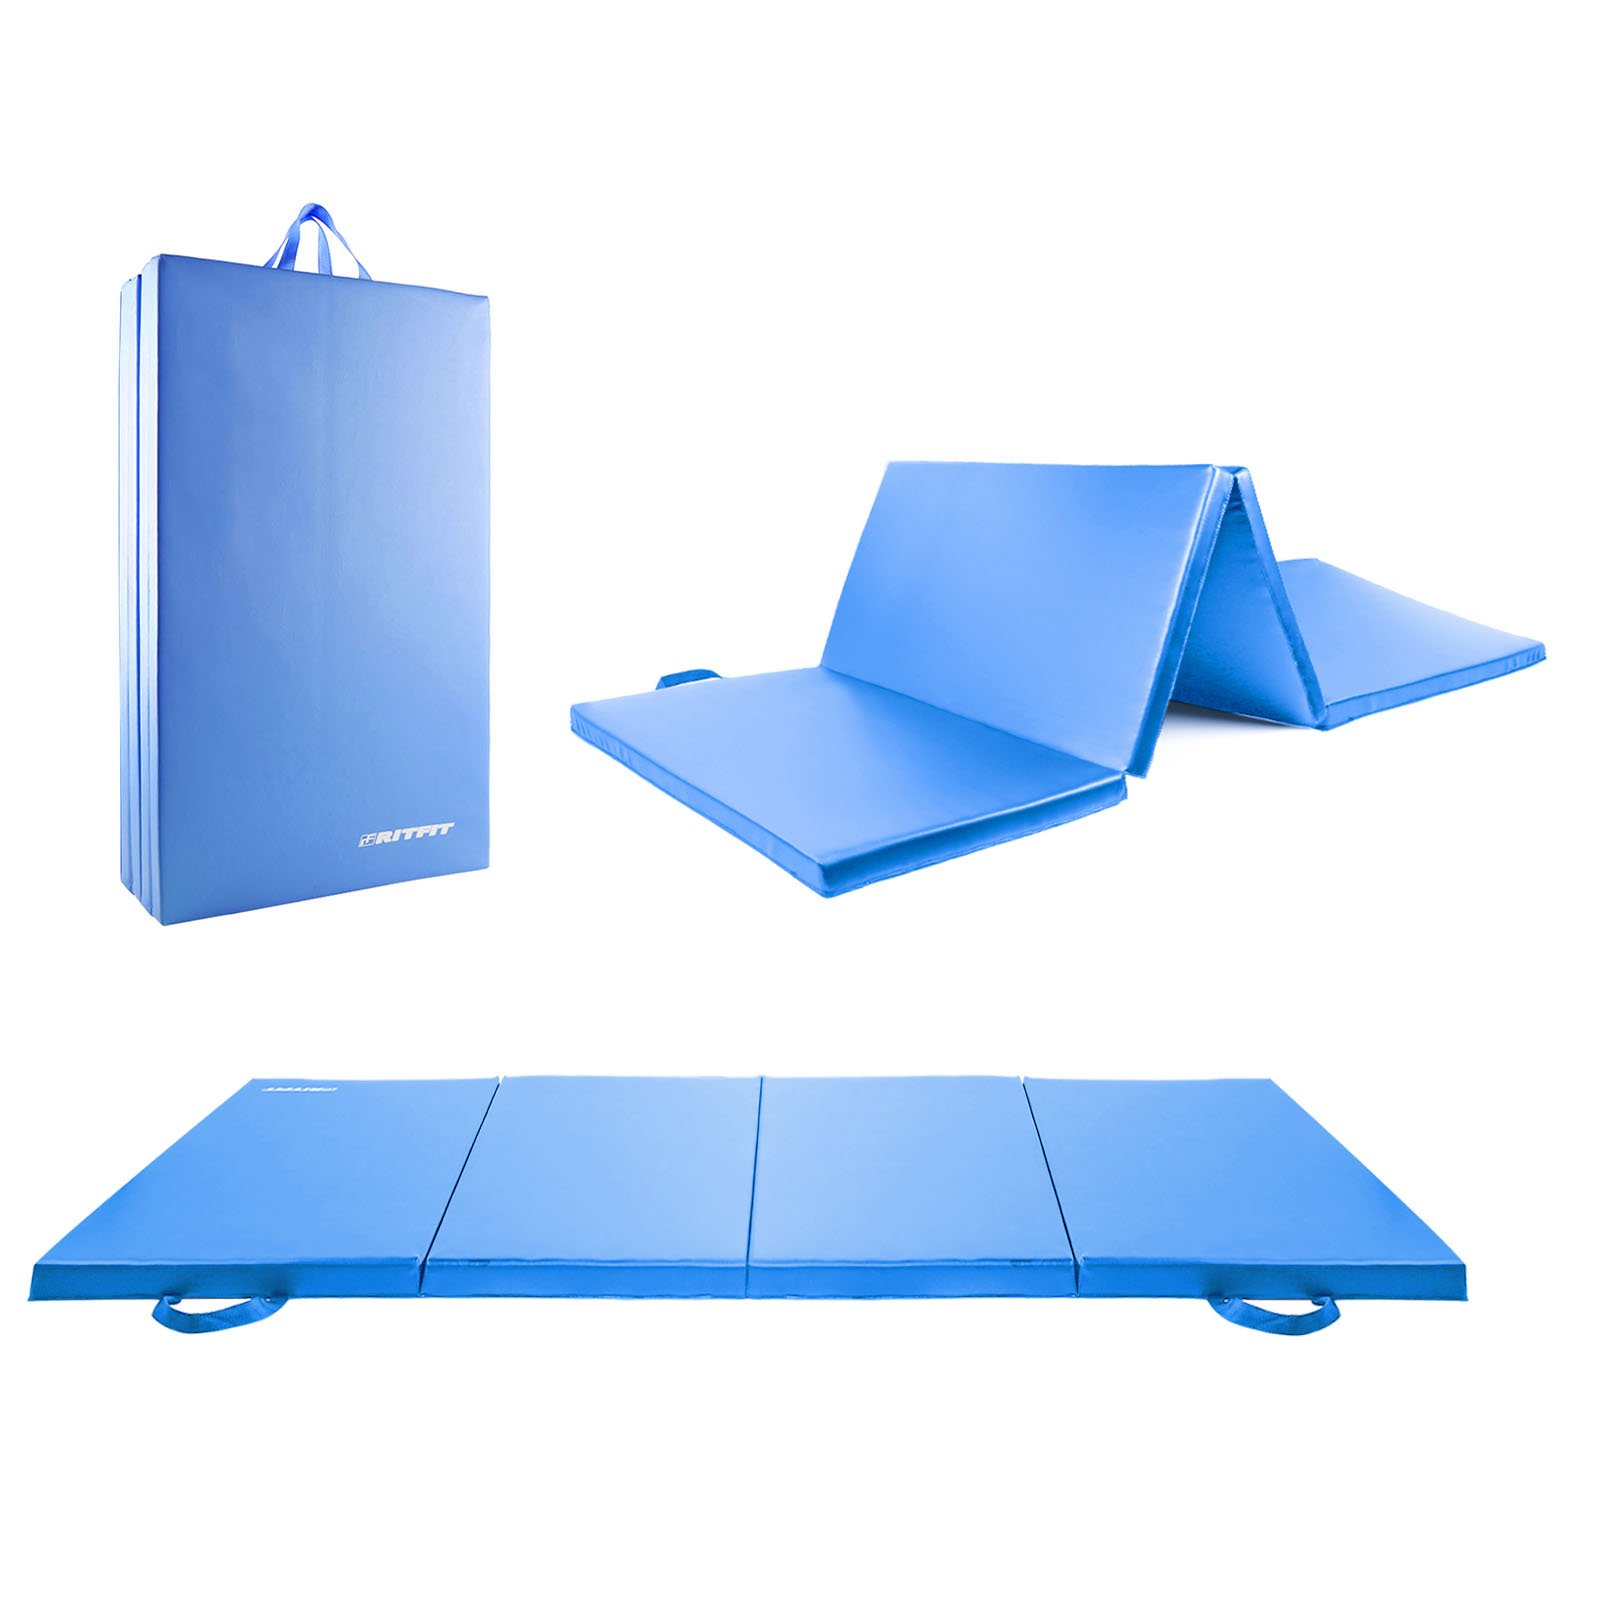 RitFit Tri-Fold Folding Thick Exercise Mat with Carry Handles - Perfect for